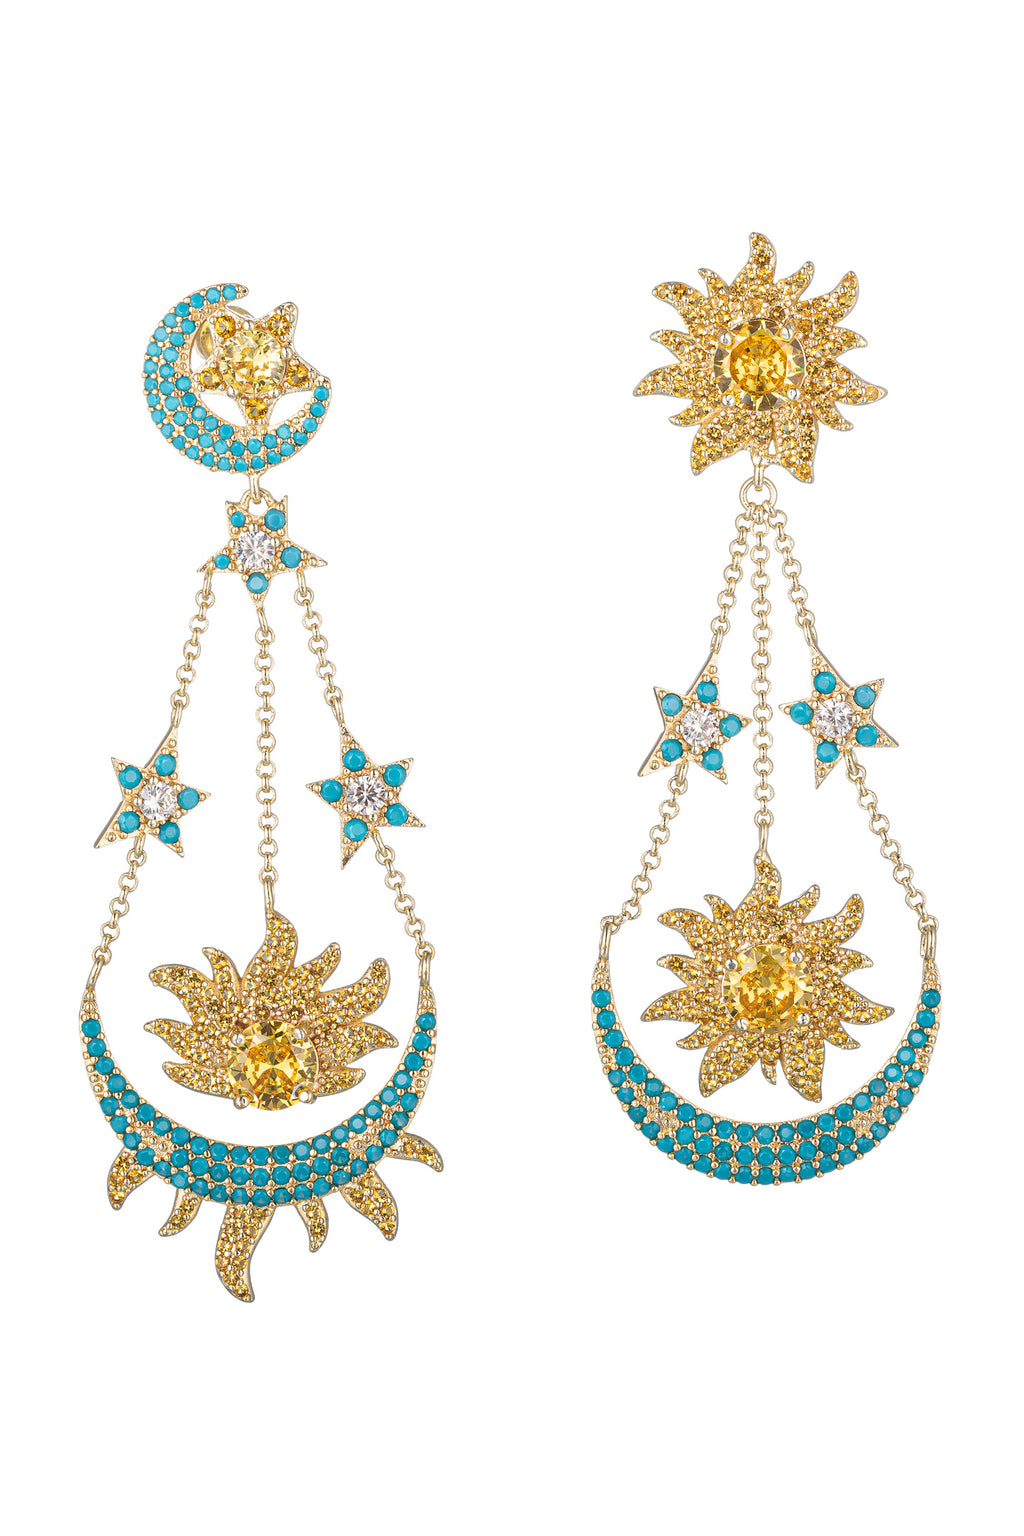 Gold tone brass sun and moon pendant drop earrings studded with blue CZ crystals.